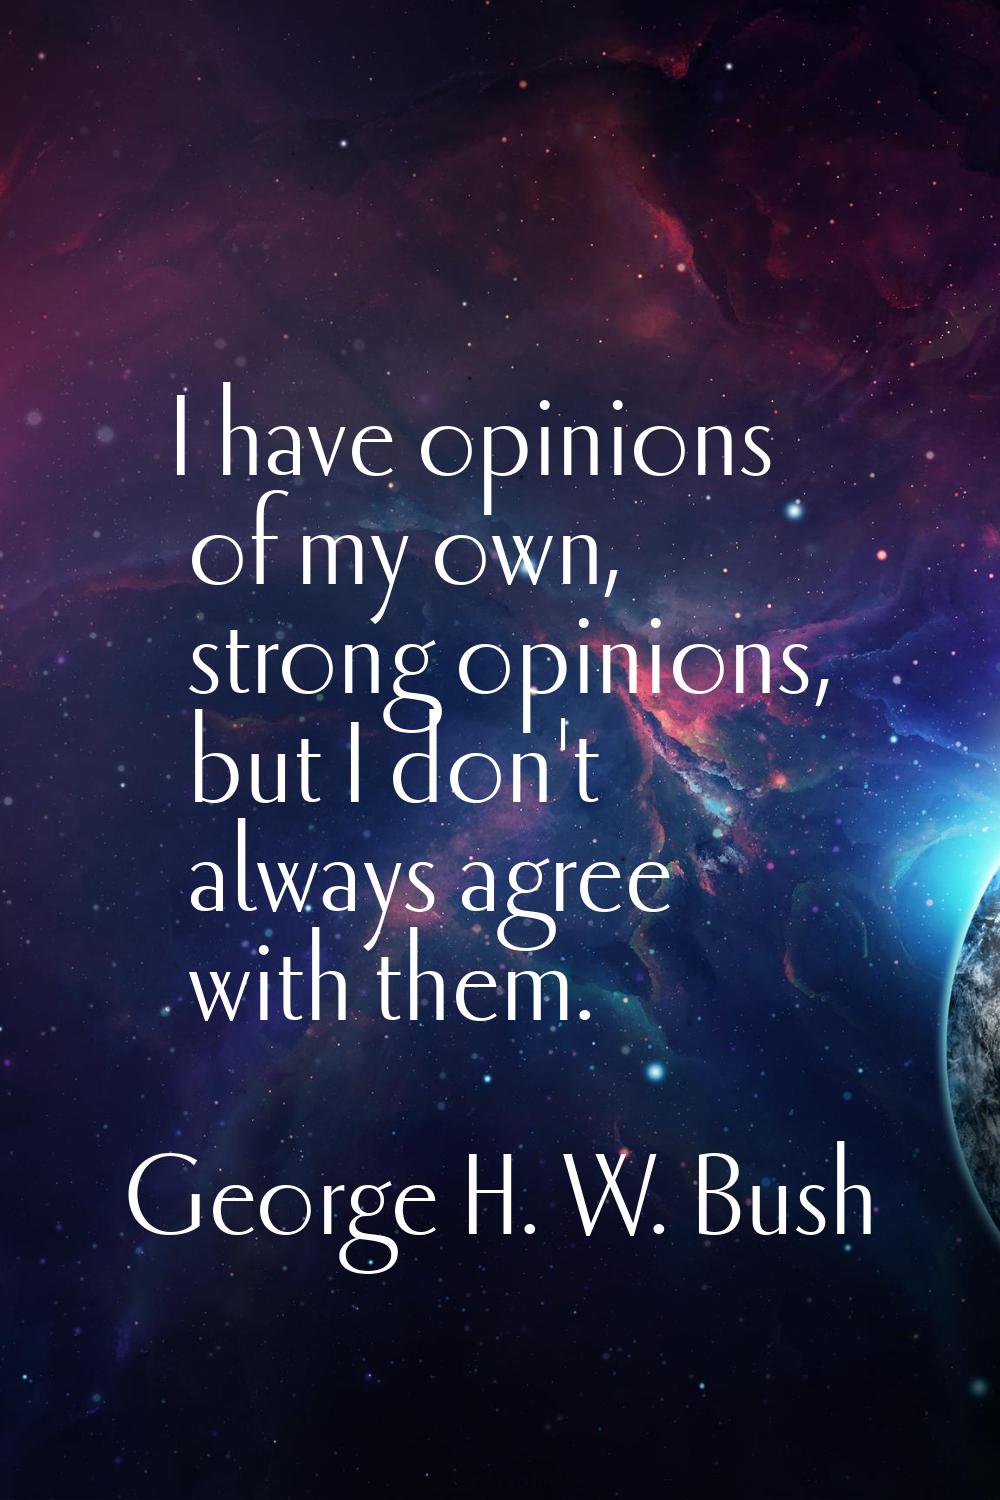 I have opinions of my own, strong opinions, but I don't always agree with them.